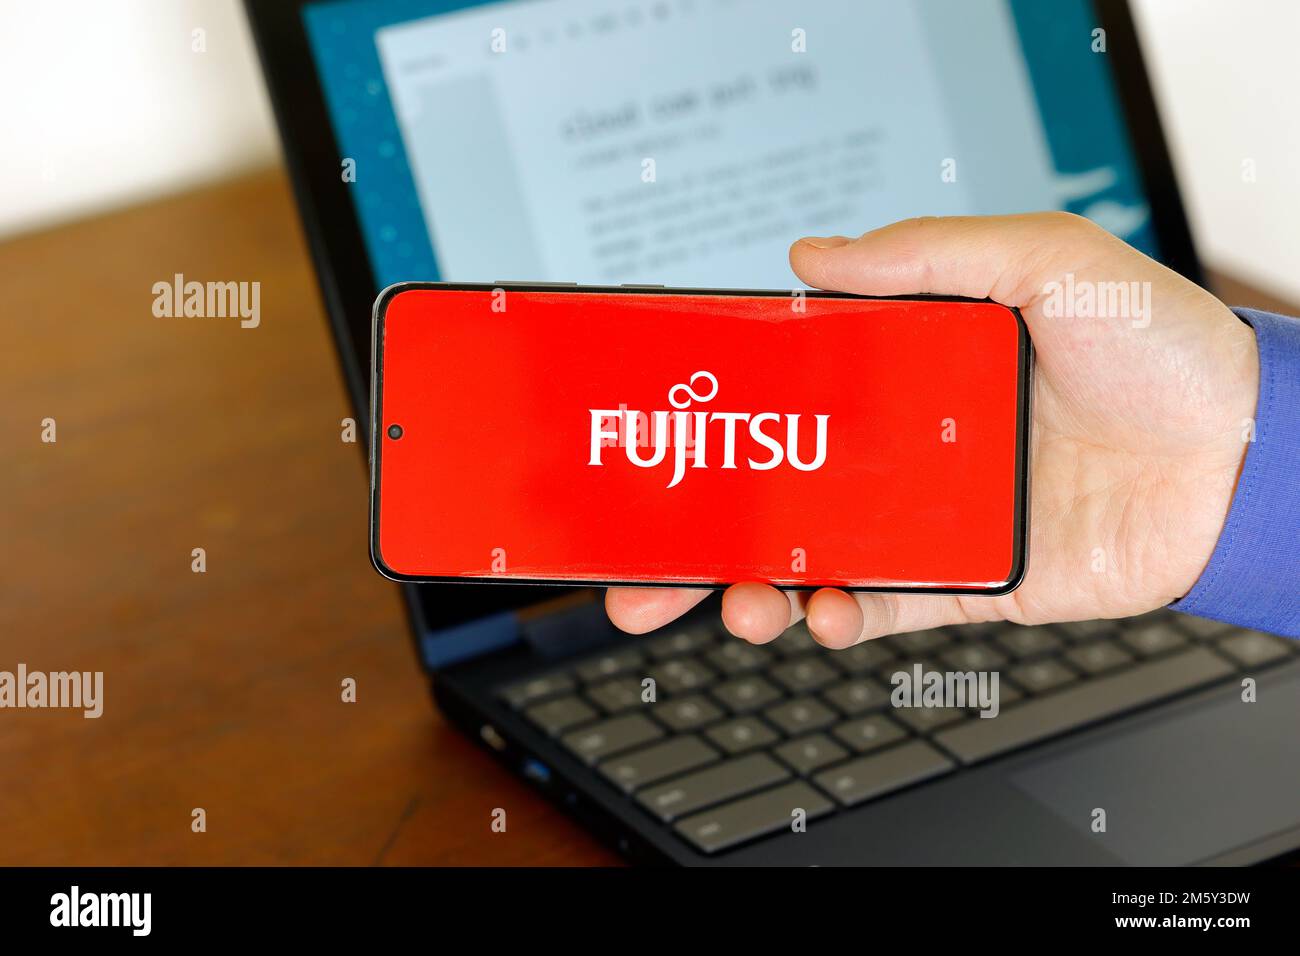 Logo of Fujitsu Cloud on a smartphone in front of a computer. Fujitsu Cloud is cloud computing echnology service from Fujitsu. Stock Photo